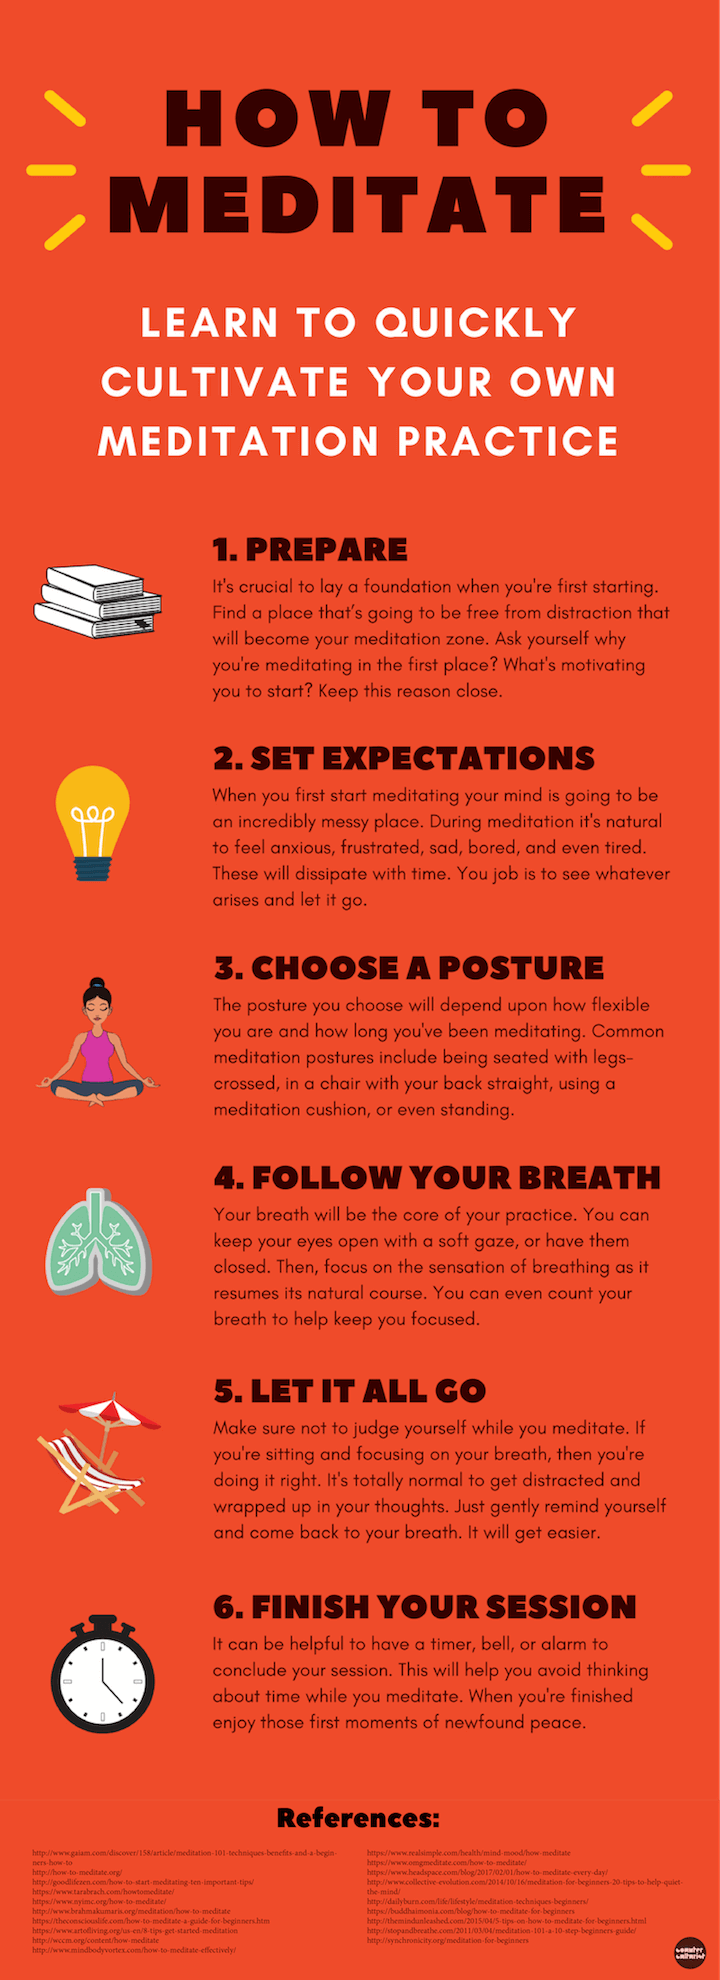 How to Meditate Infographic